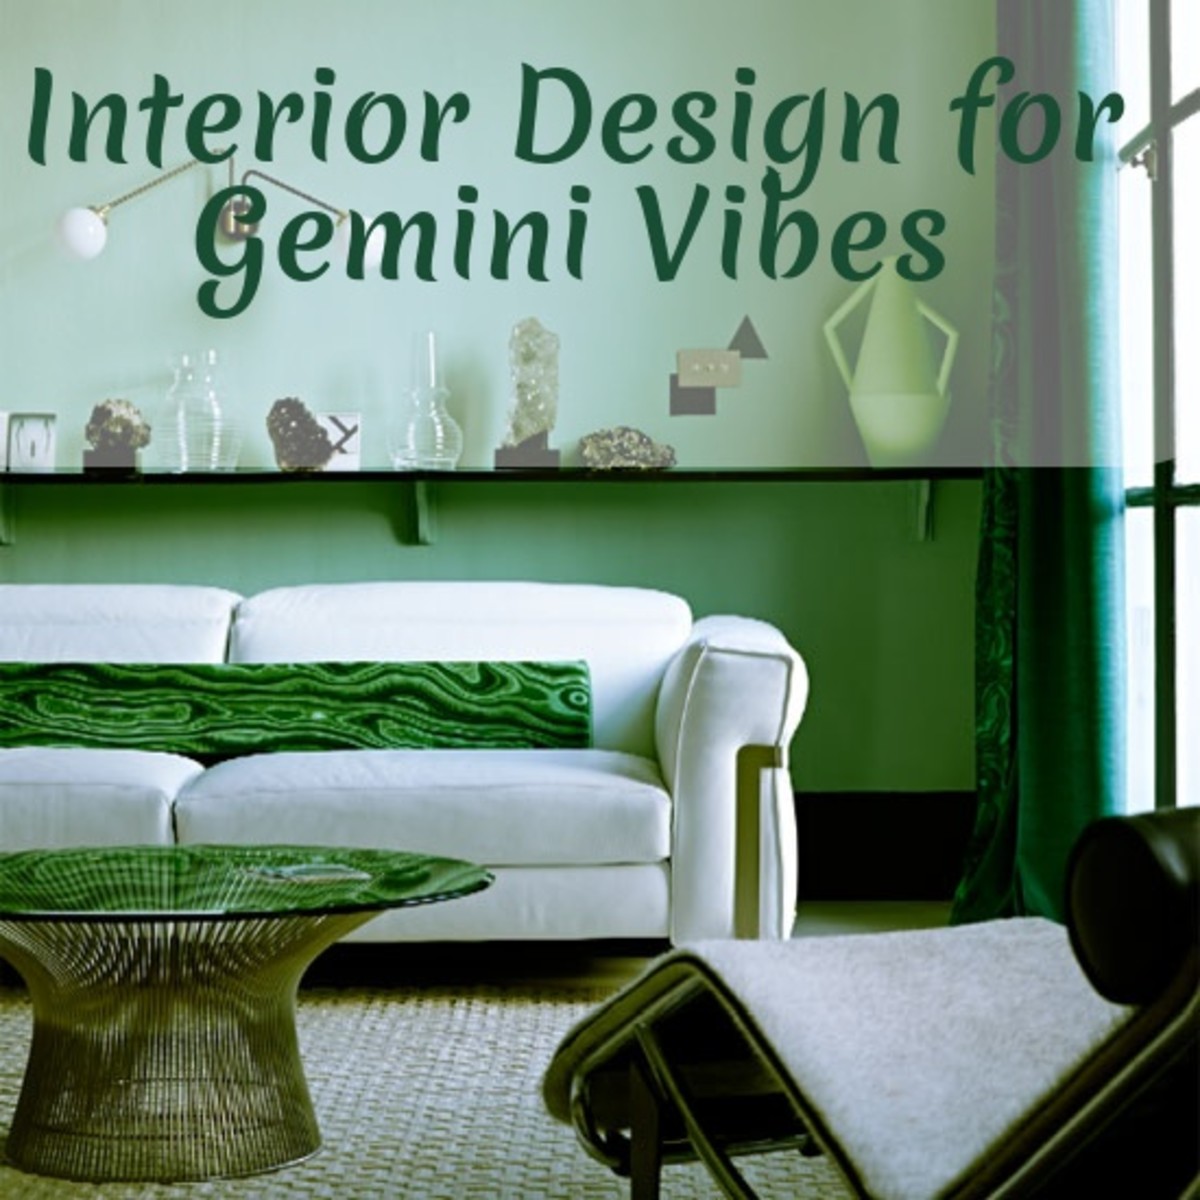 Are you a Gemini? These design ideas may resonate with you!